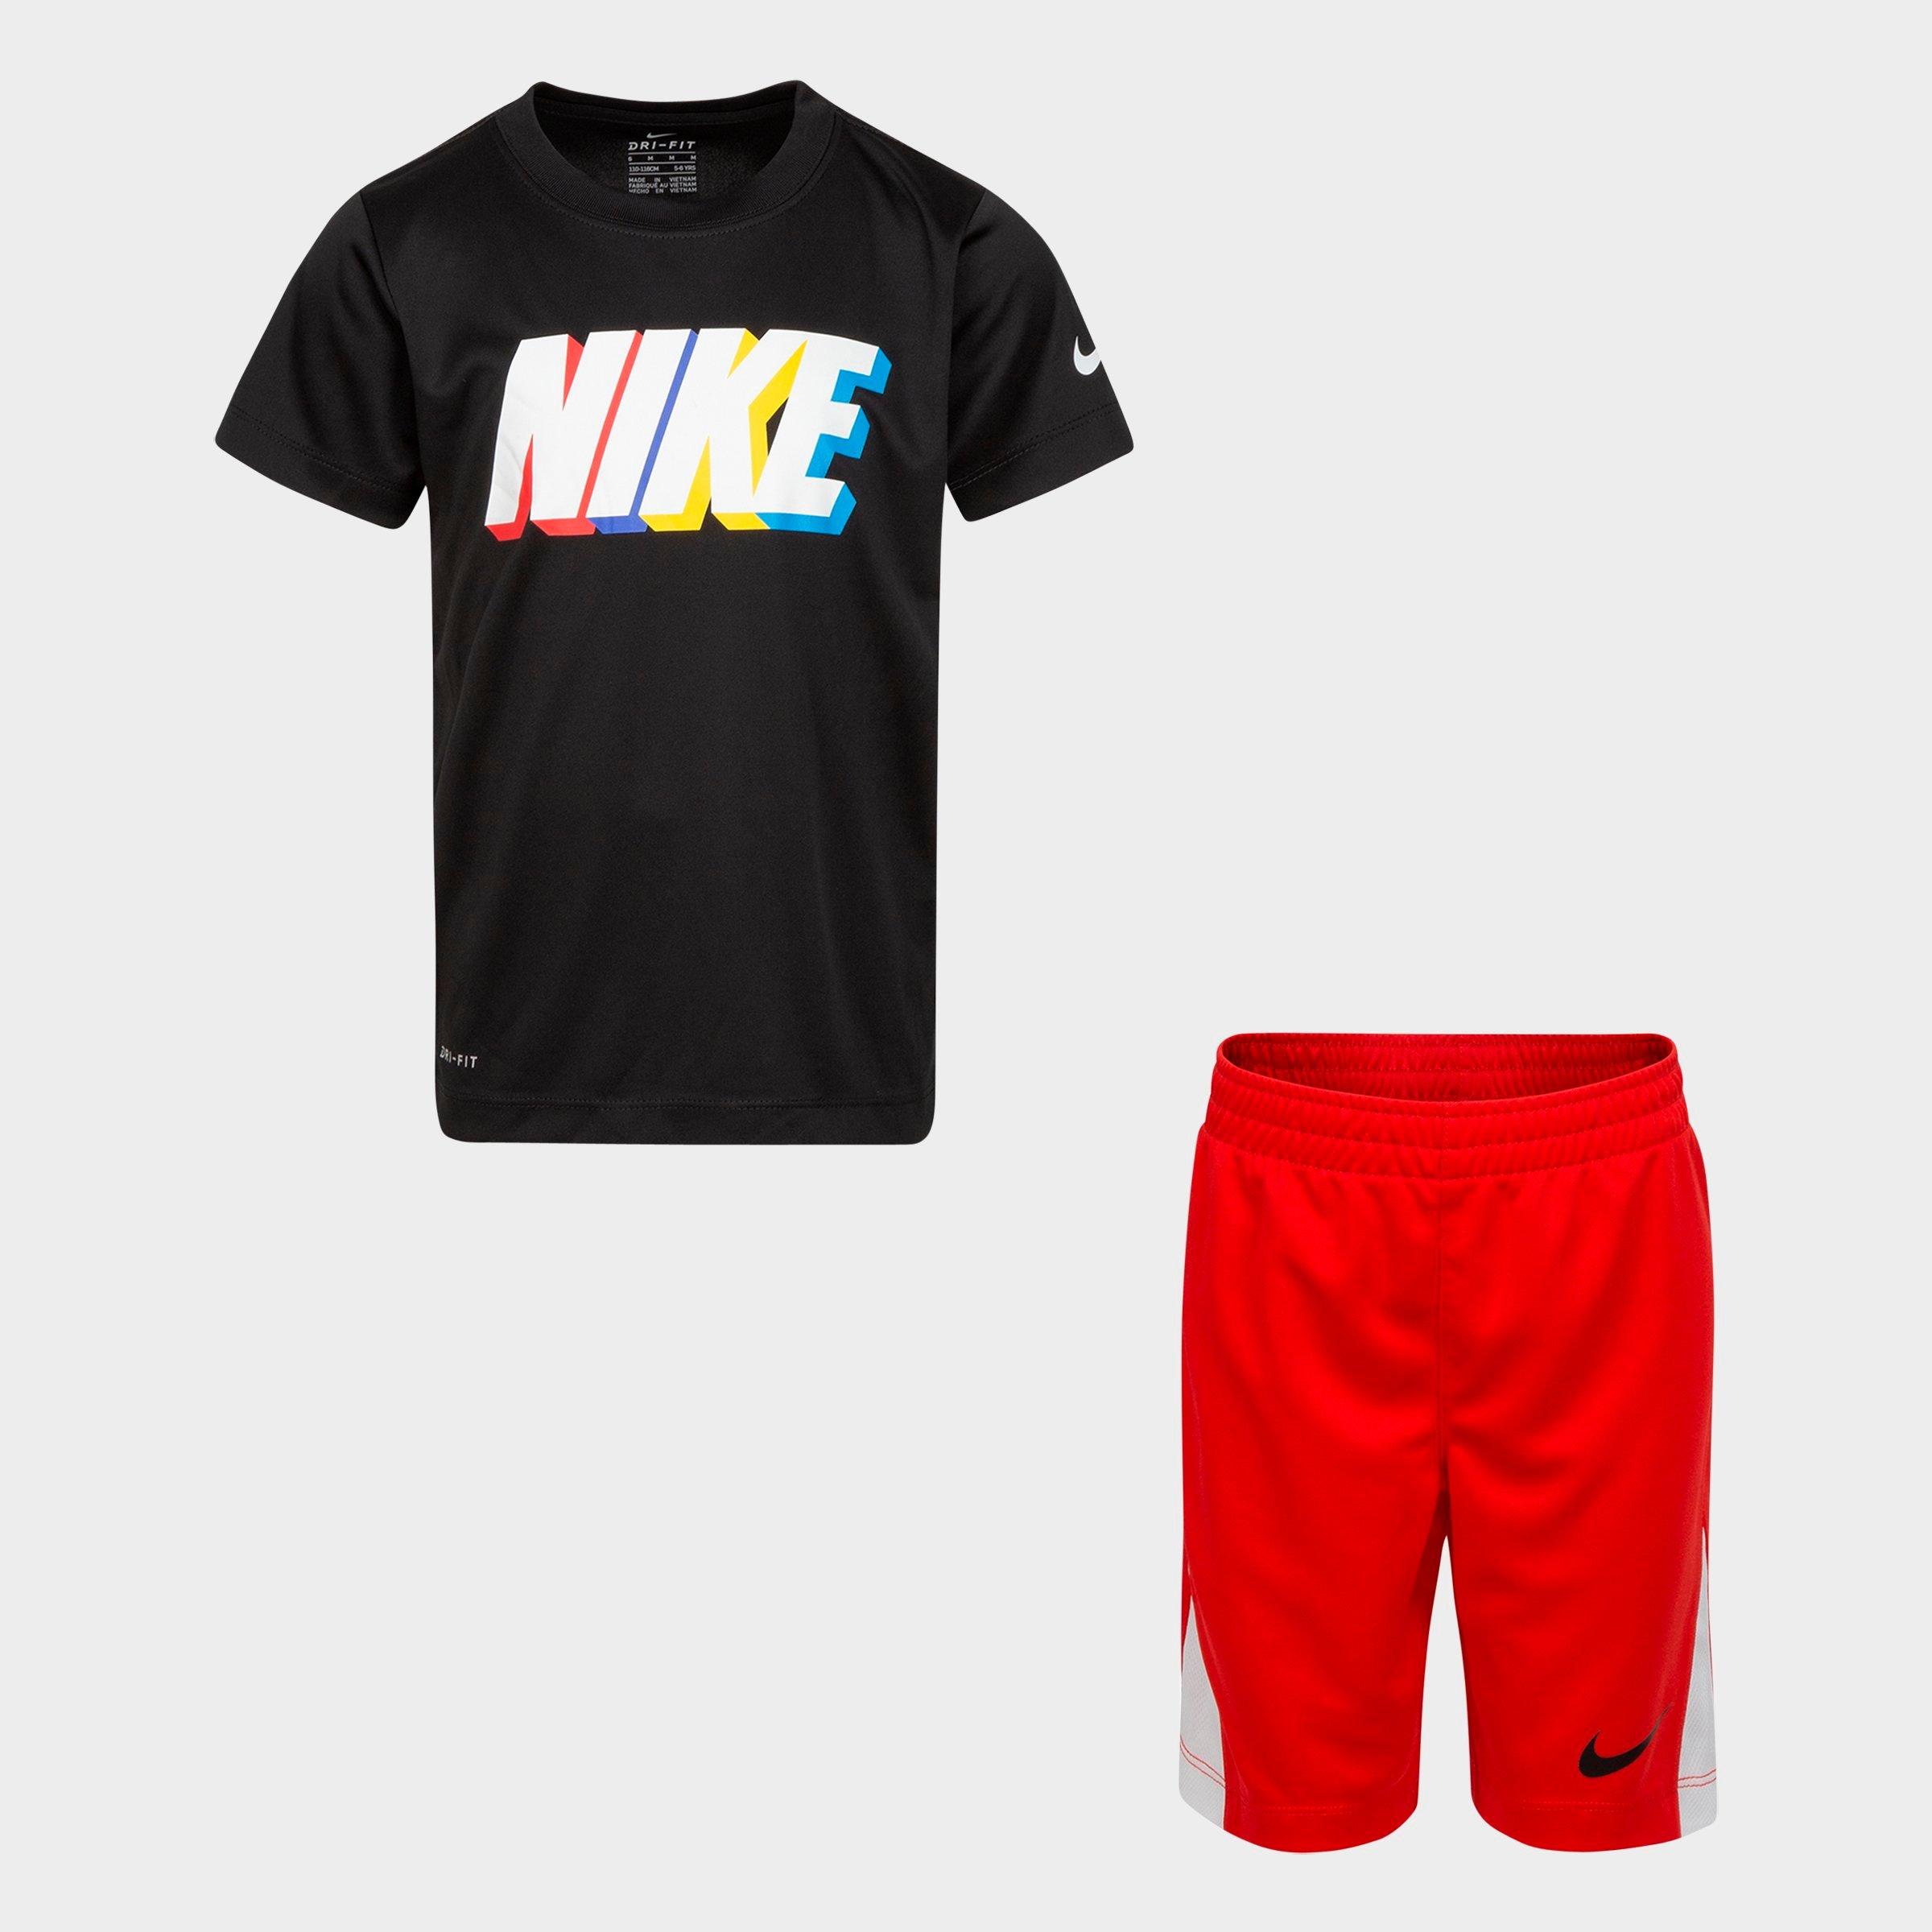 kids nike clothes on sale